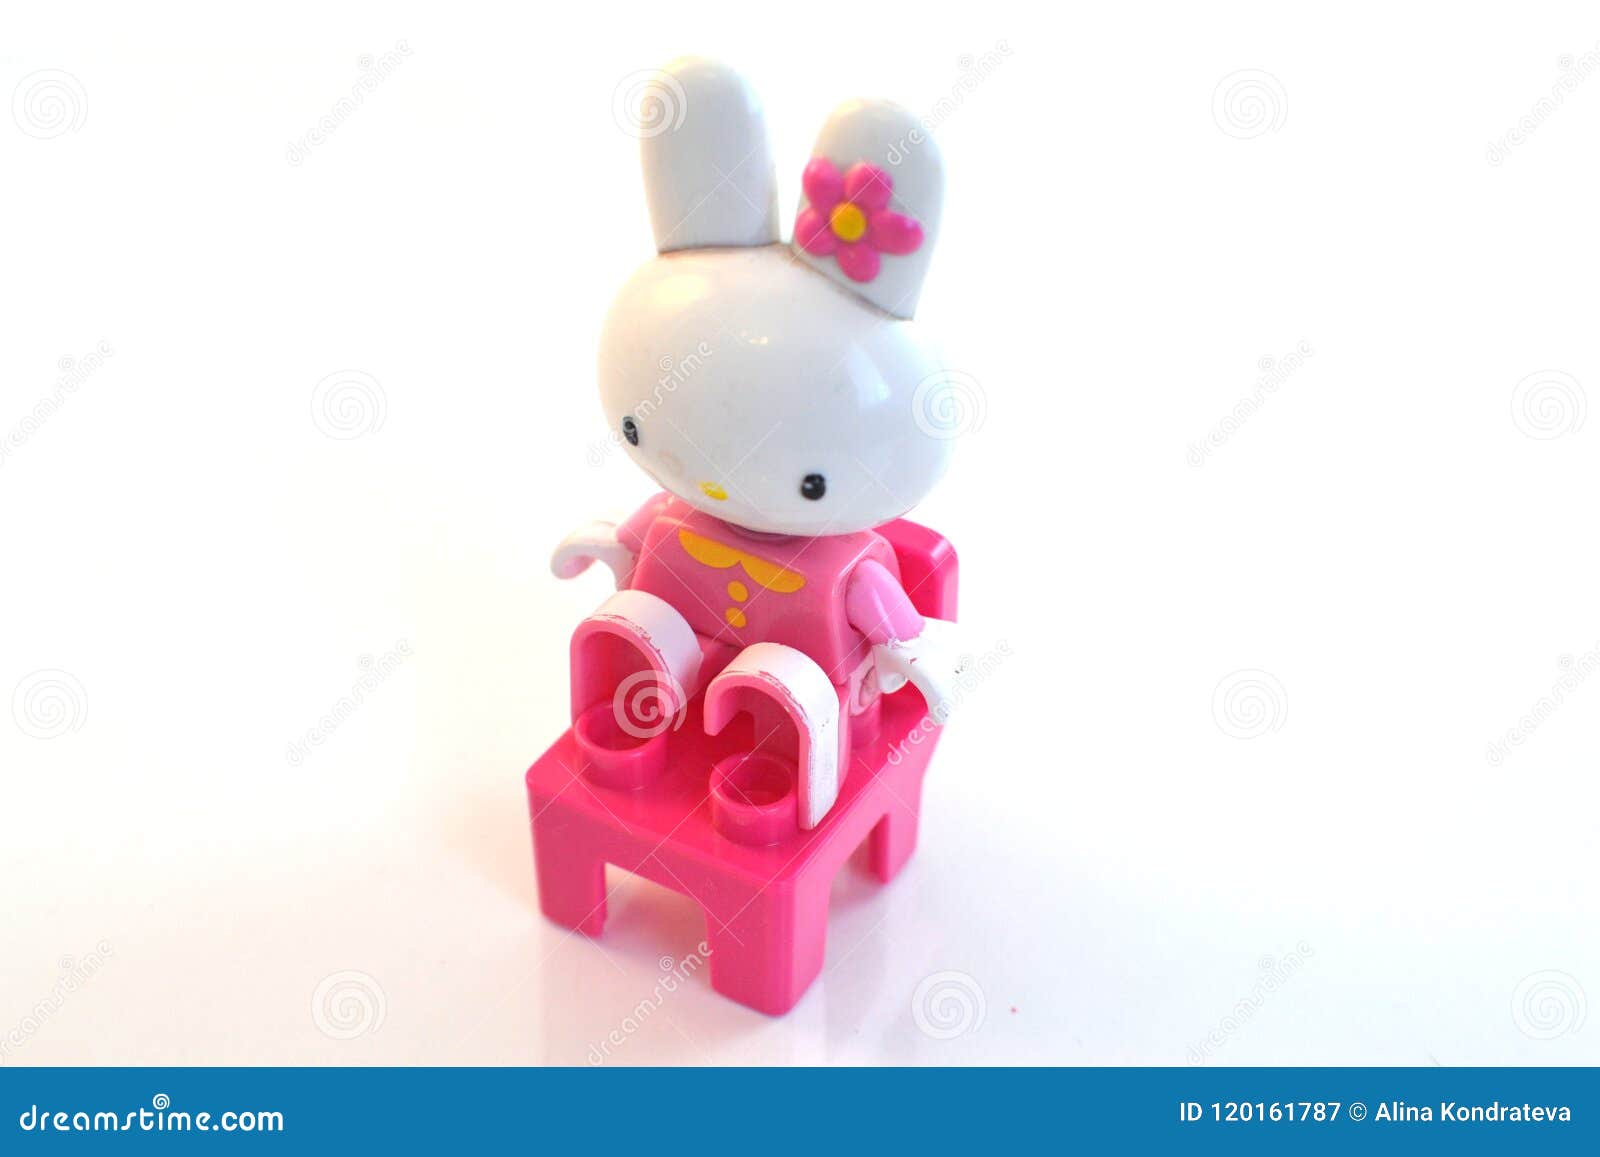 Toy Hello Kitty Rabbit Editorial Photography - Image of brand: 120161787